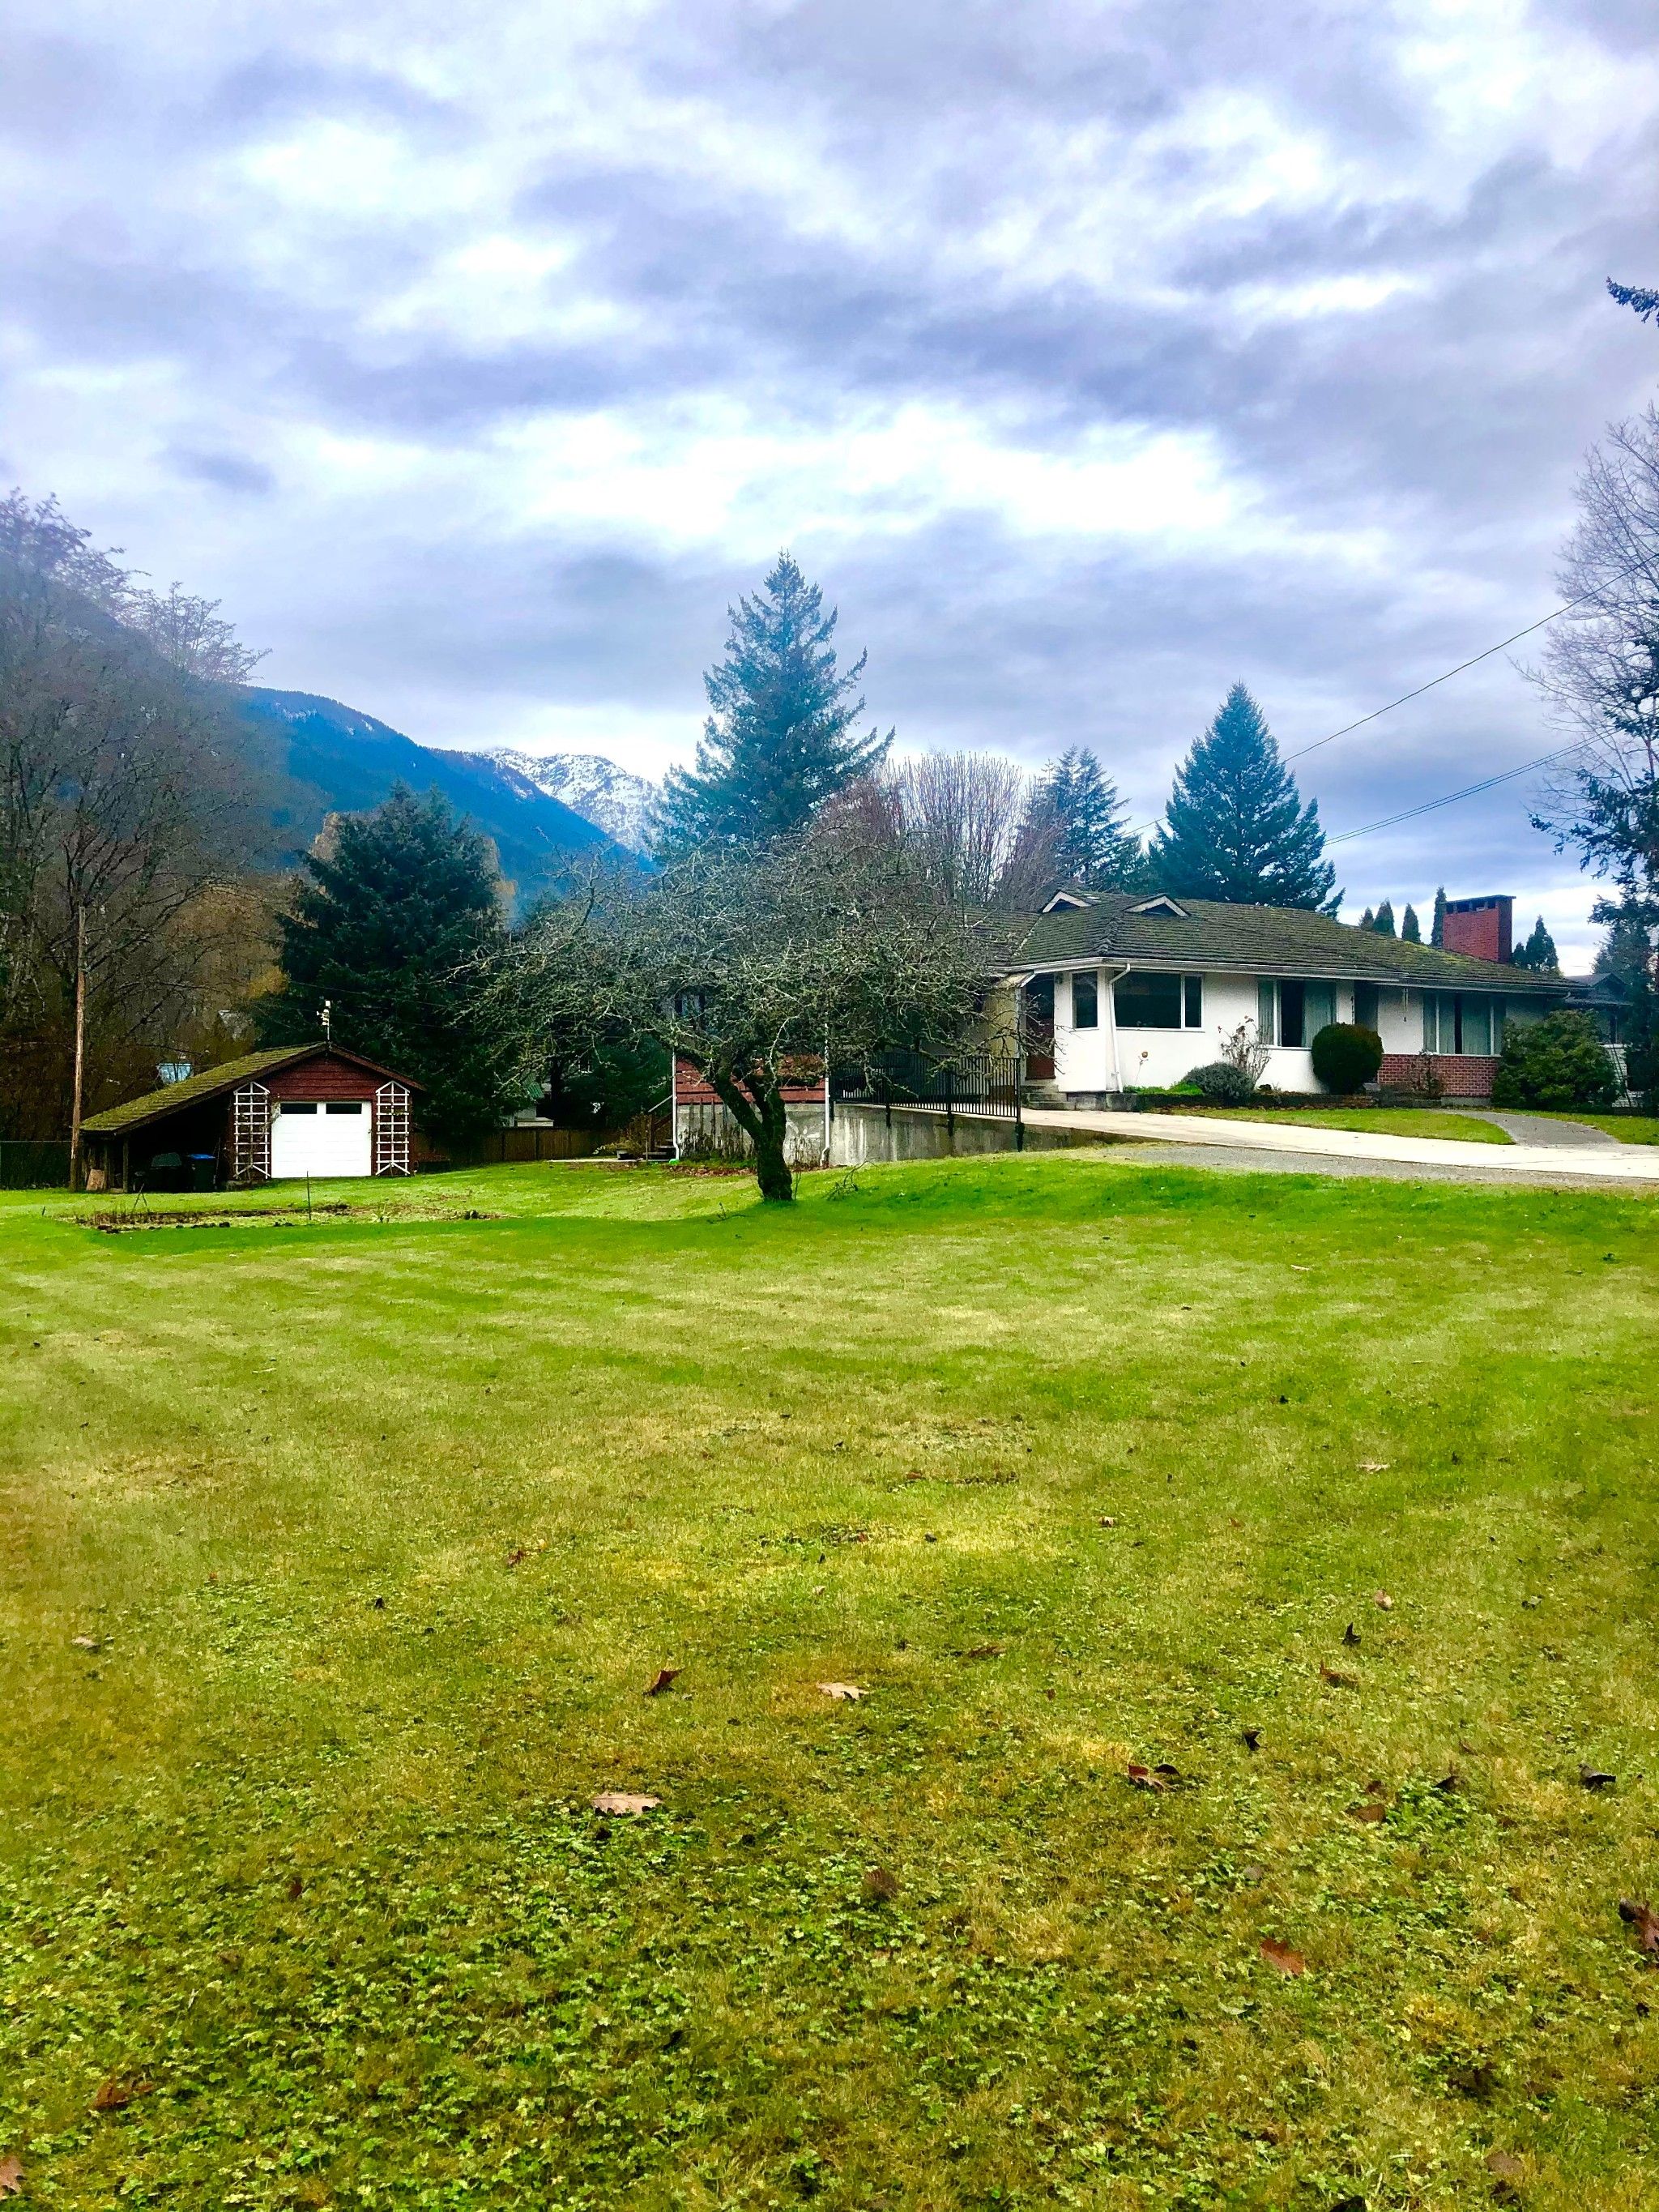 Main Photo: 41717 Governent Road in Squamish: Brackendale House for sale : MLS®# R2513183